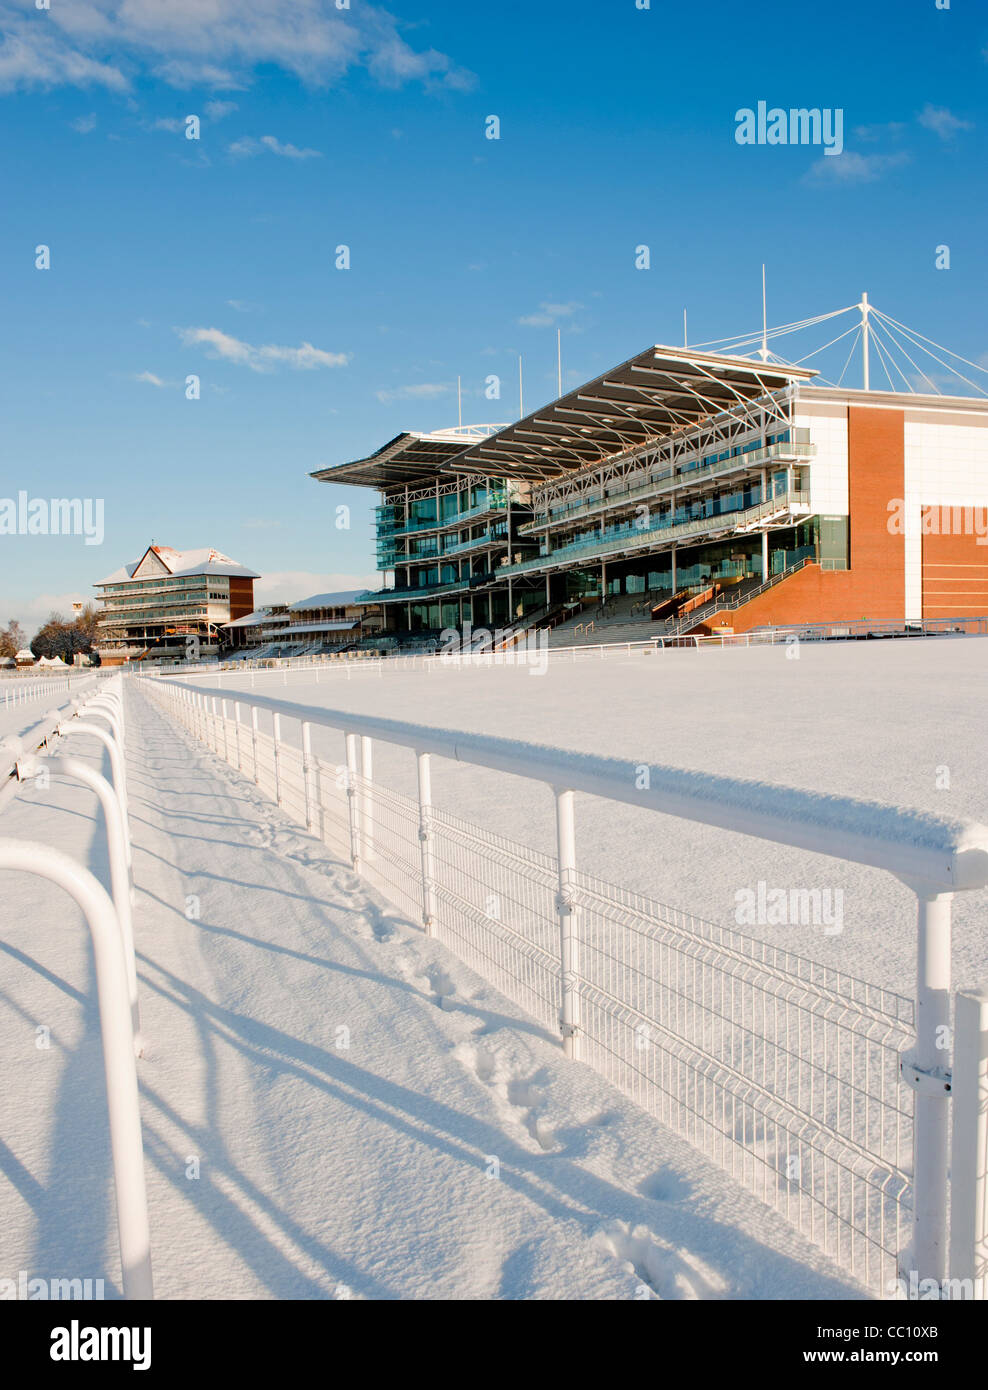 County Stand at York Racecourse, in the snow. Stock Photo